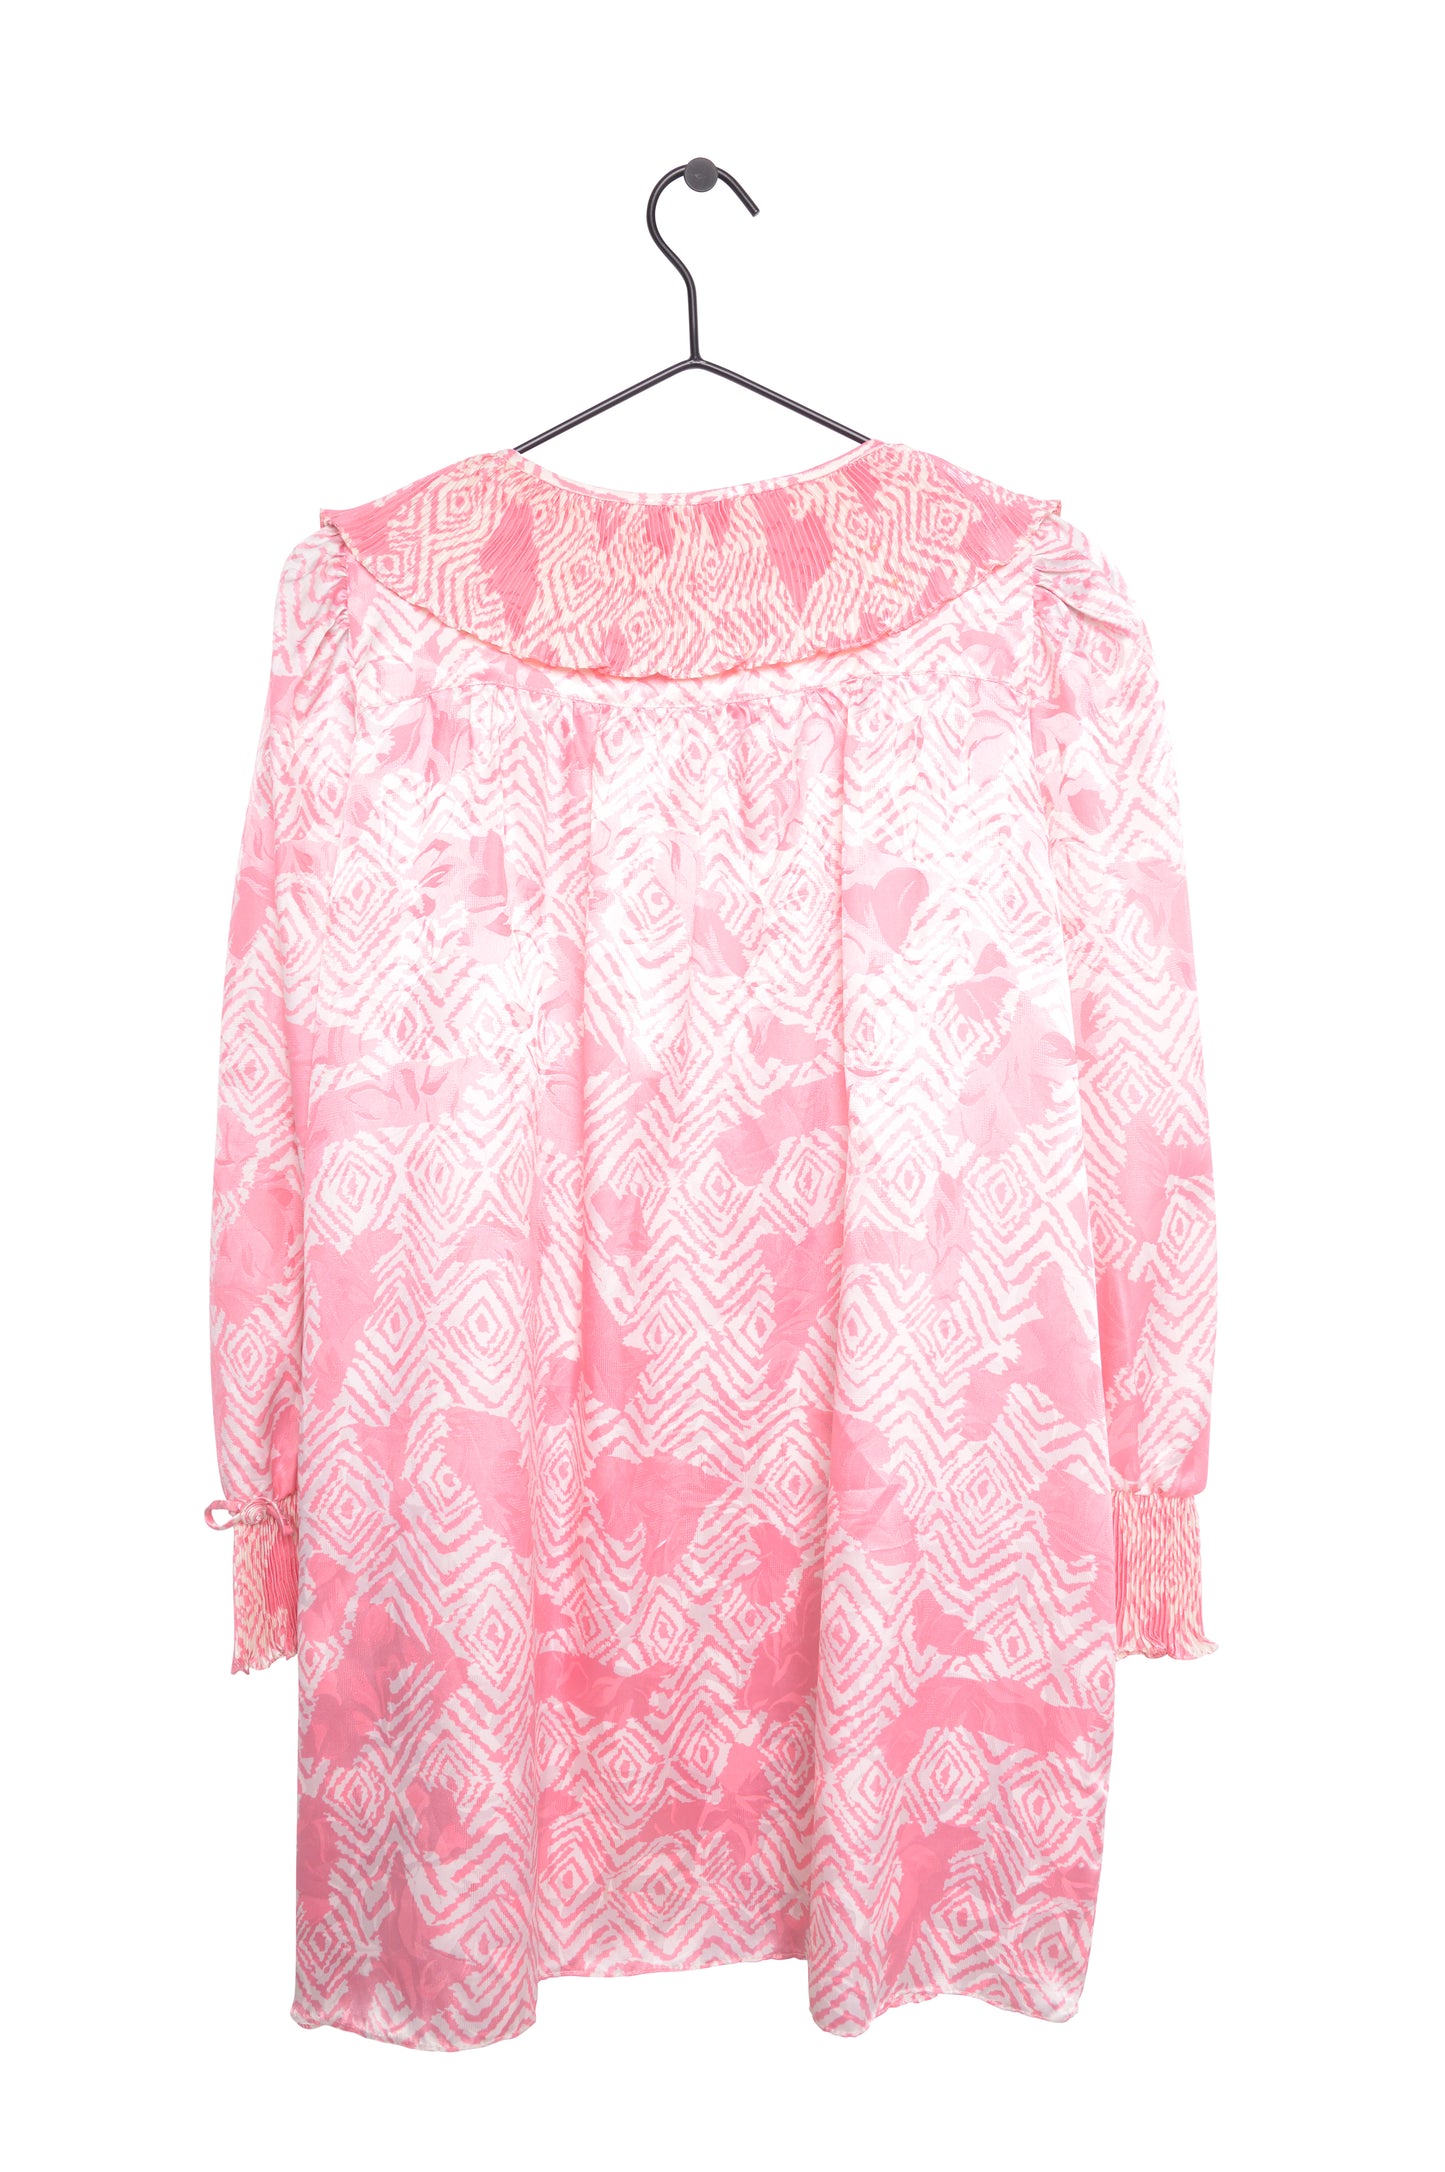 Christian Dior Patterned Top